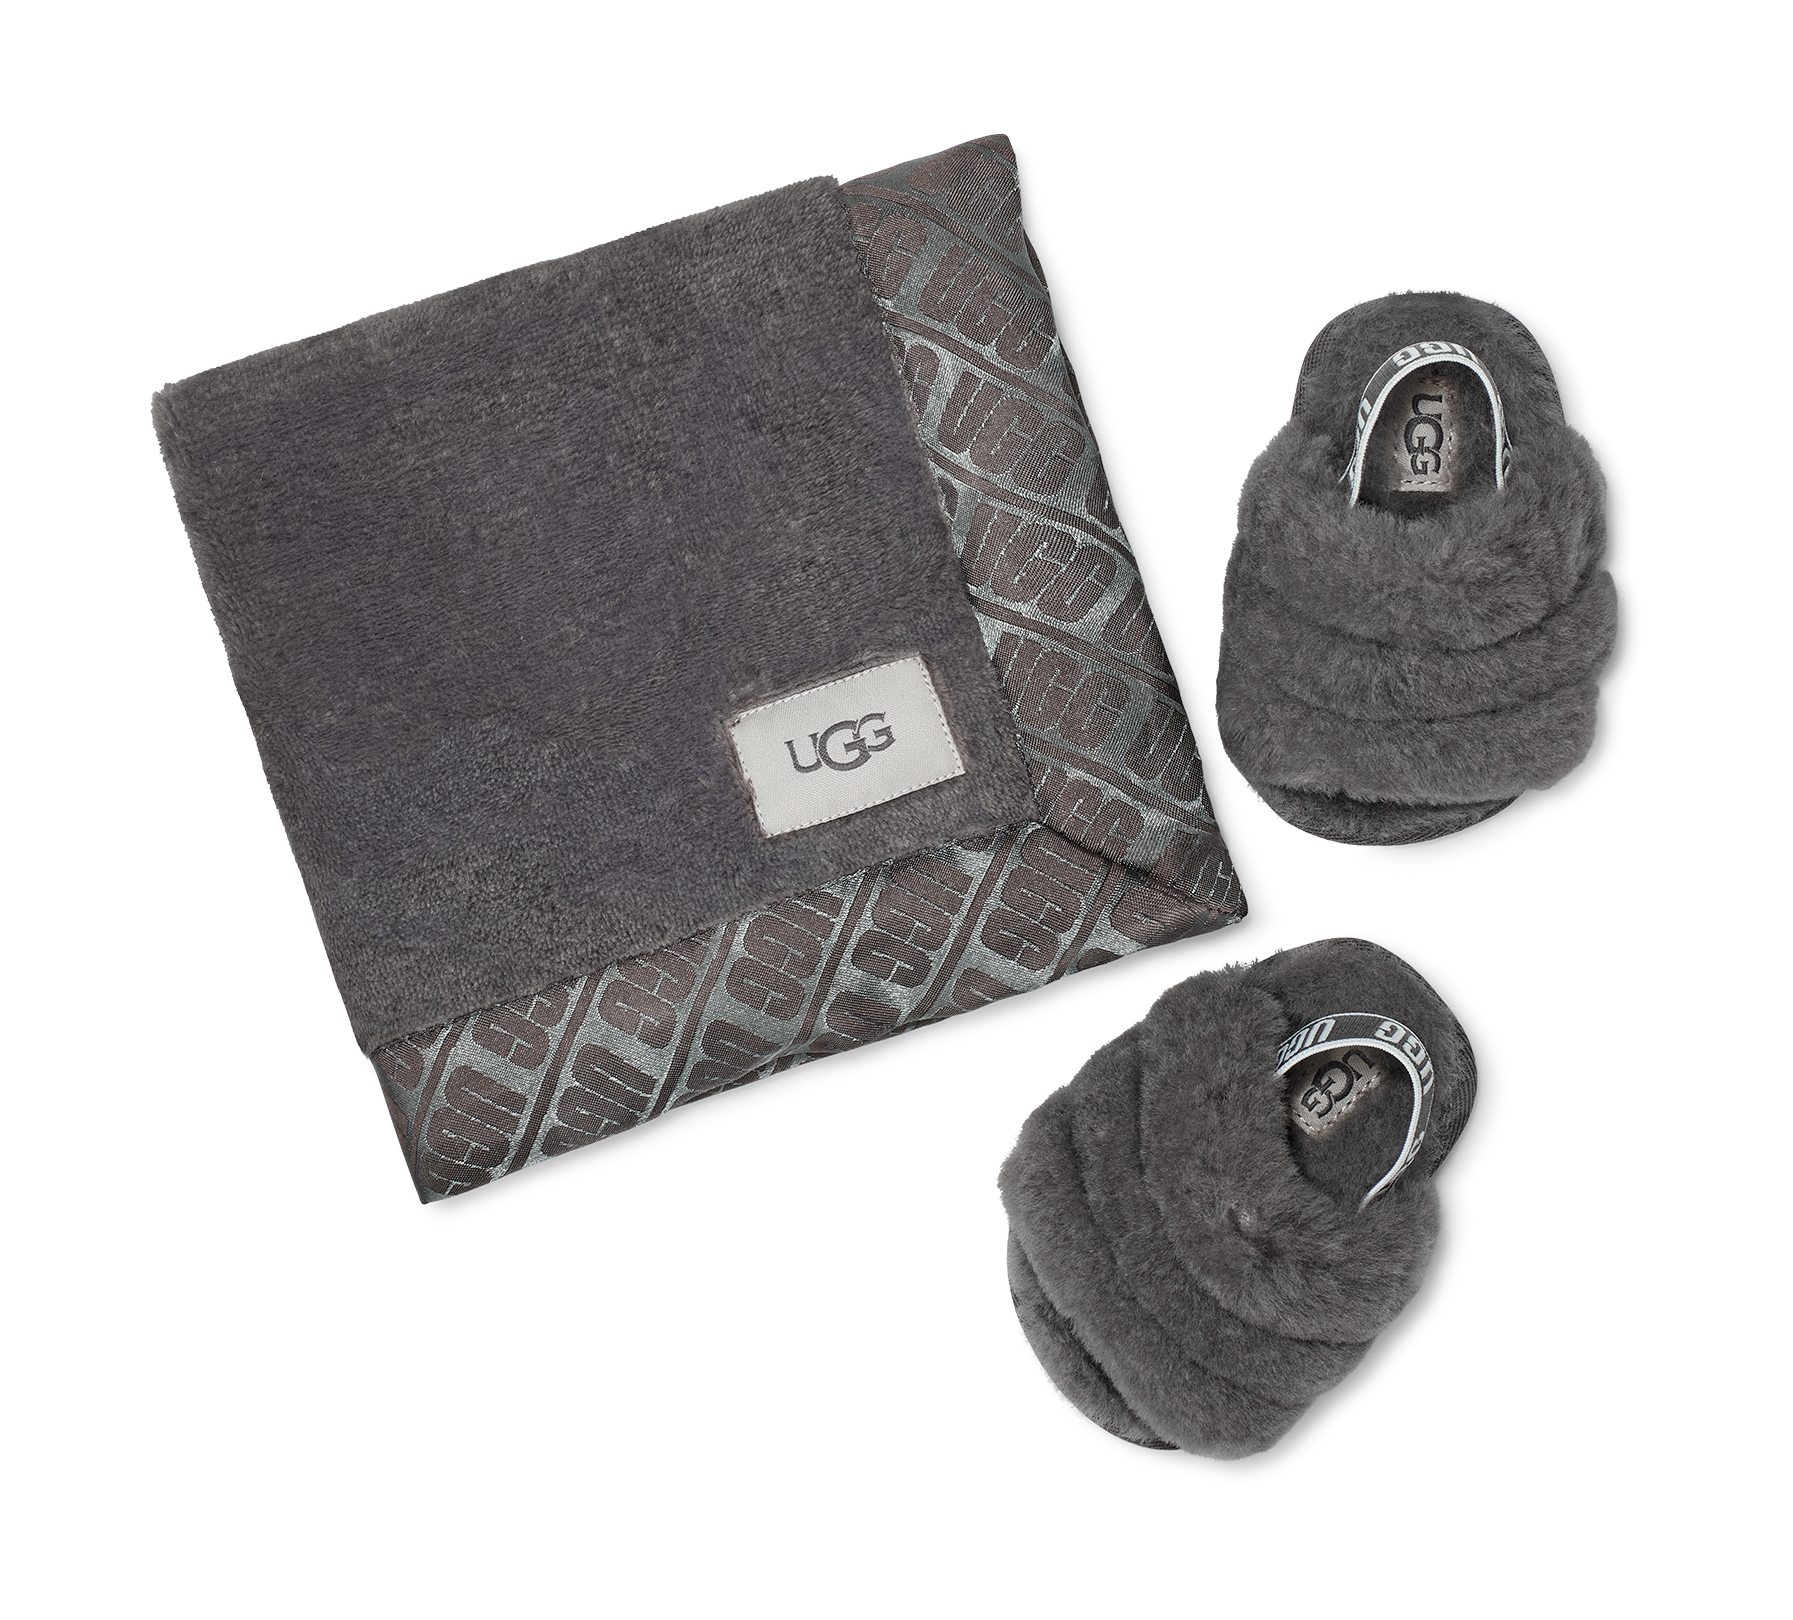 UGG Infant Fluff Yeah Slide and Lovely Blanket Set - Charcoal - The Foot Factory